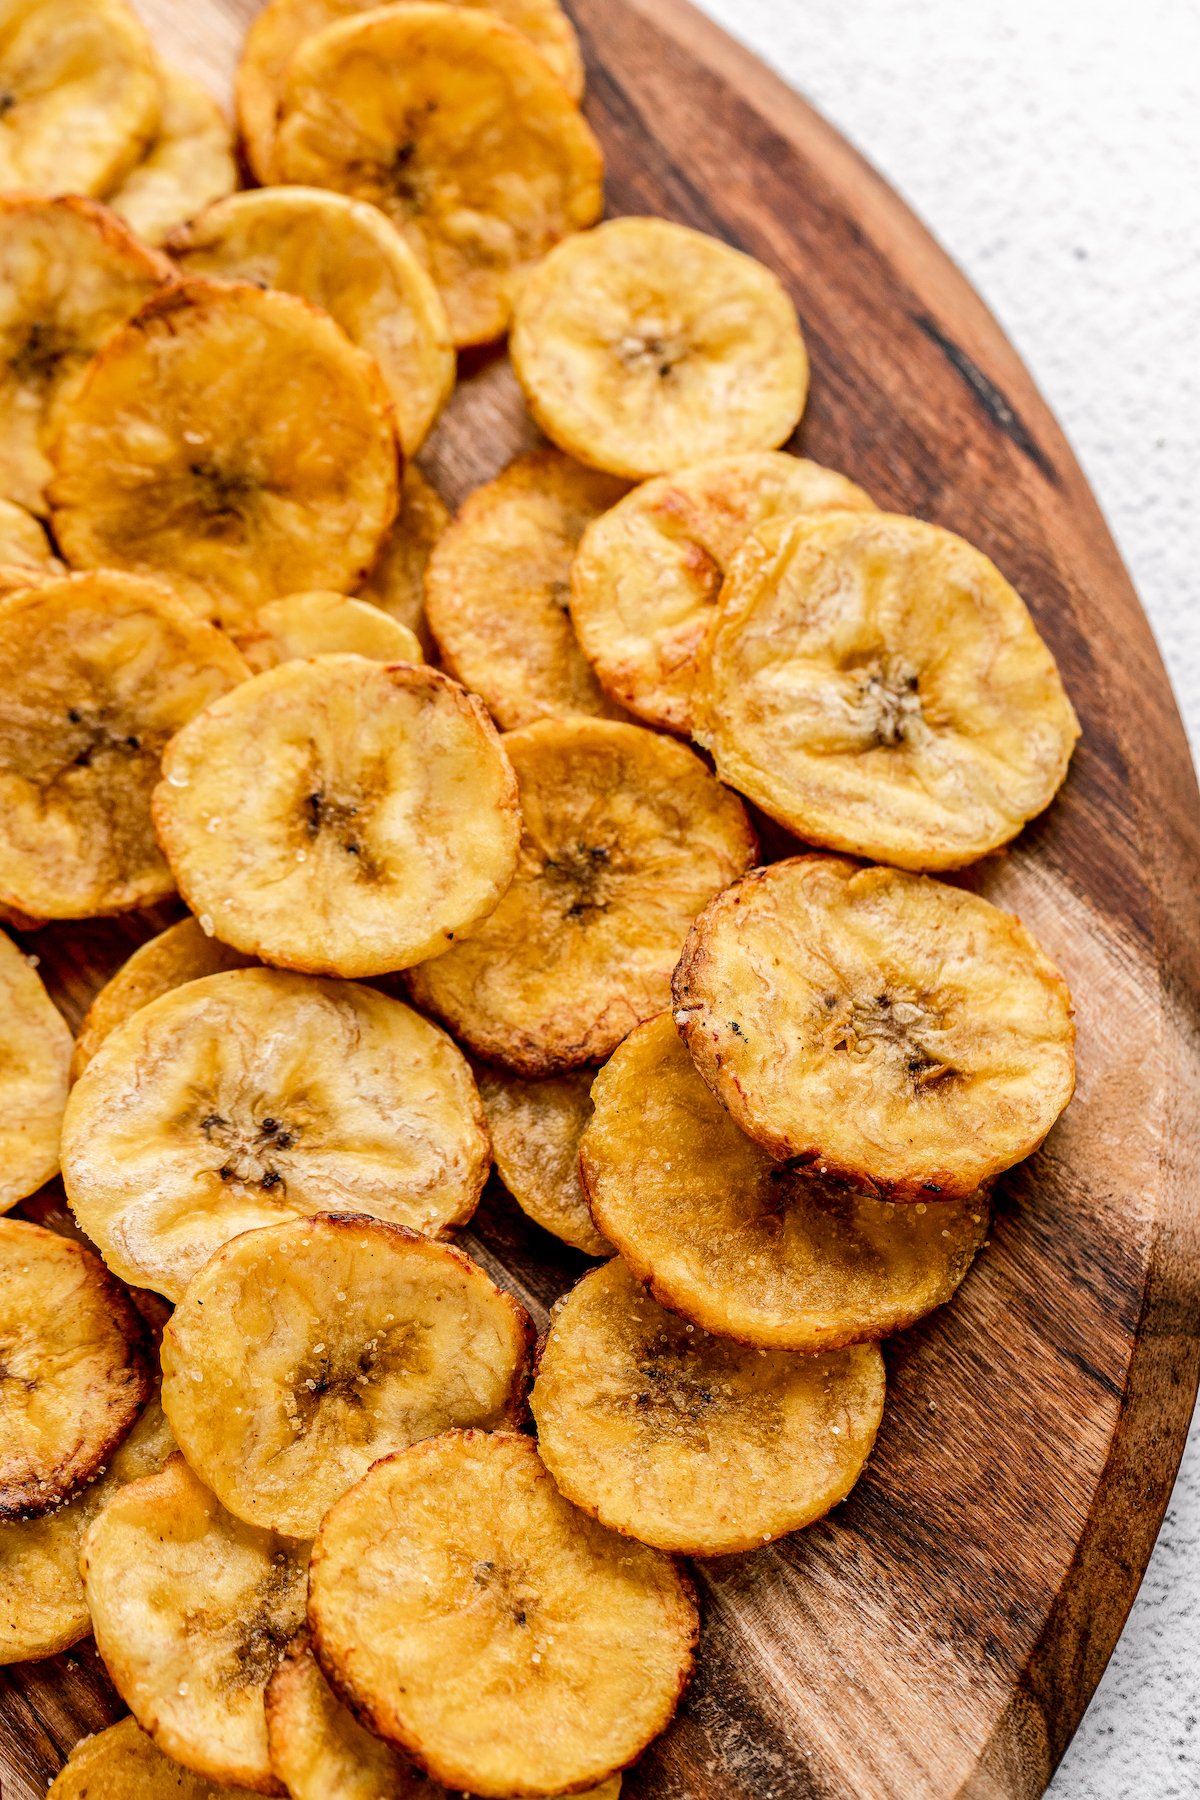 Plantain chips scattered on a cutting board.